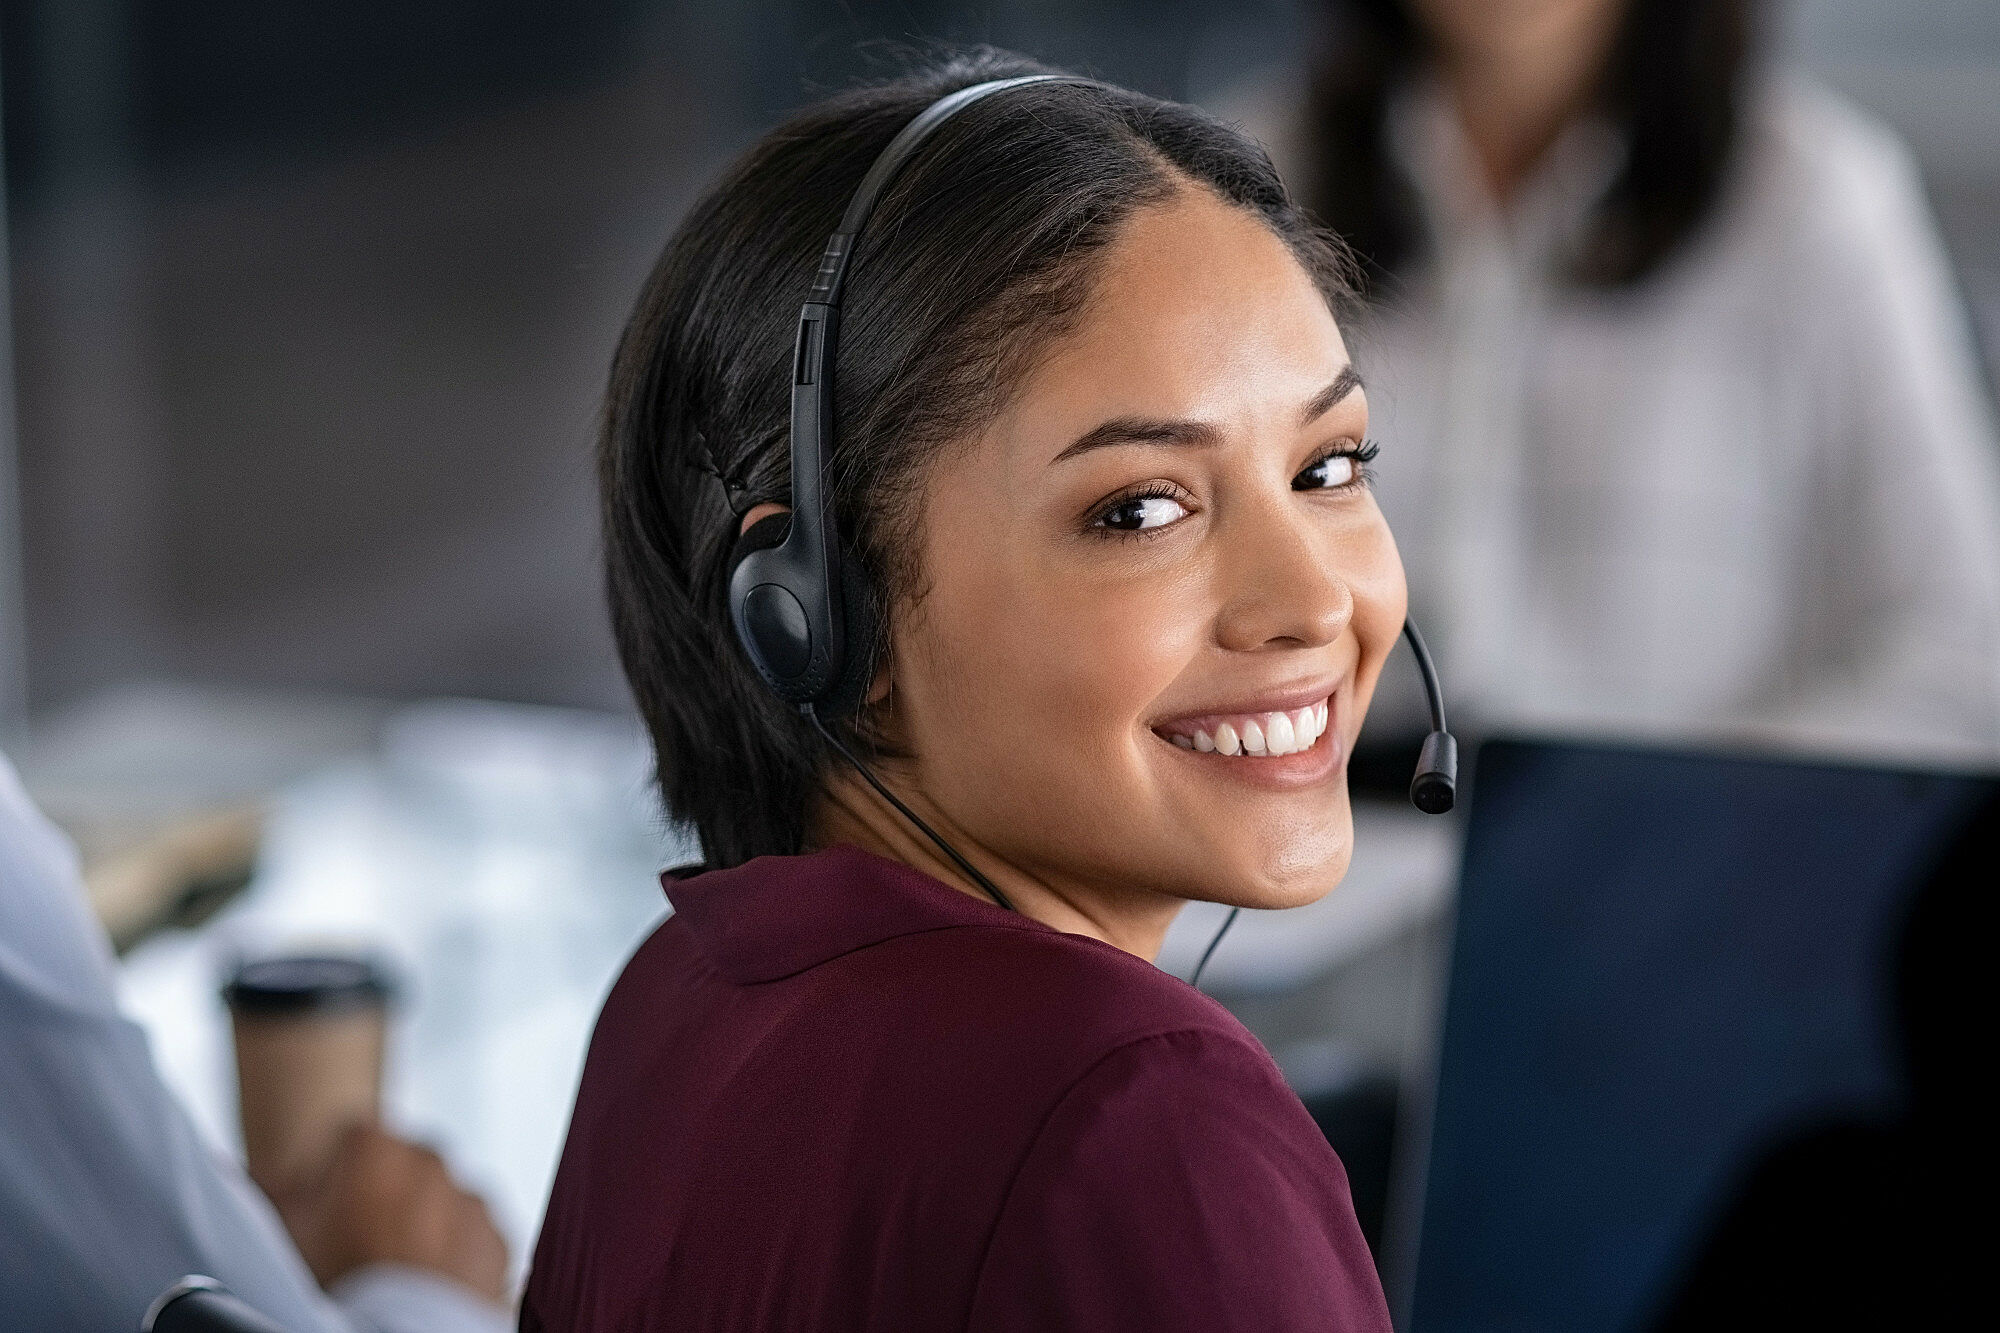 Portrait of smiling young businesswoman wearing headset in office. Portrait of a customer service agent looking at camera. Happy telephone operator latin girl with headset working at computer.